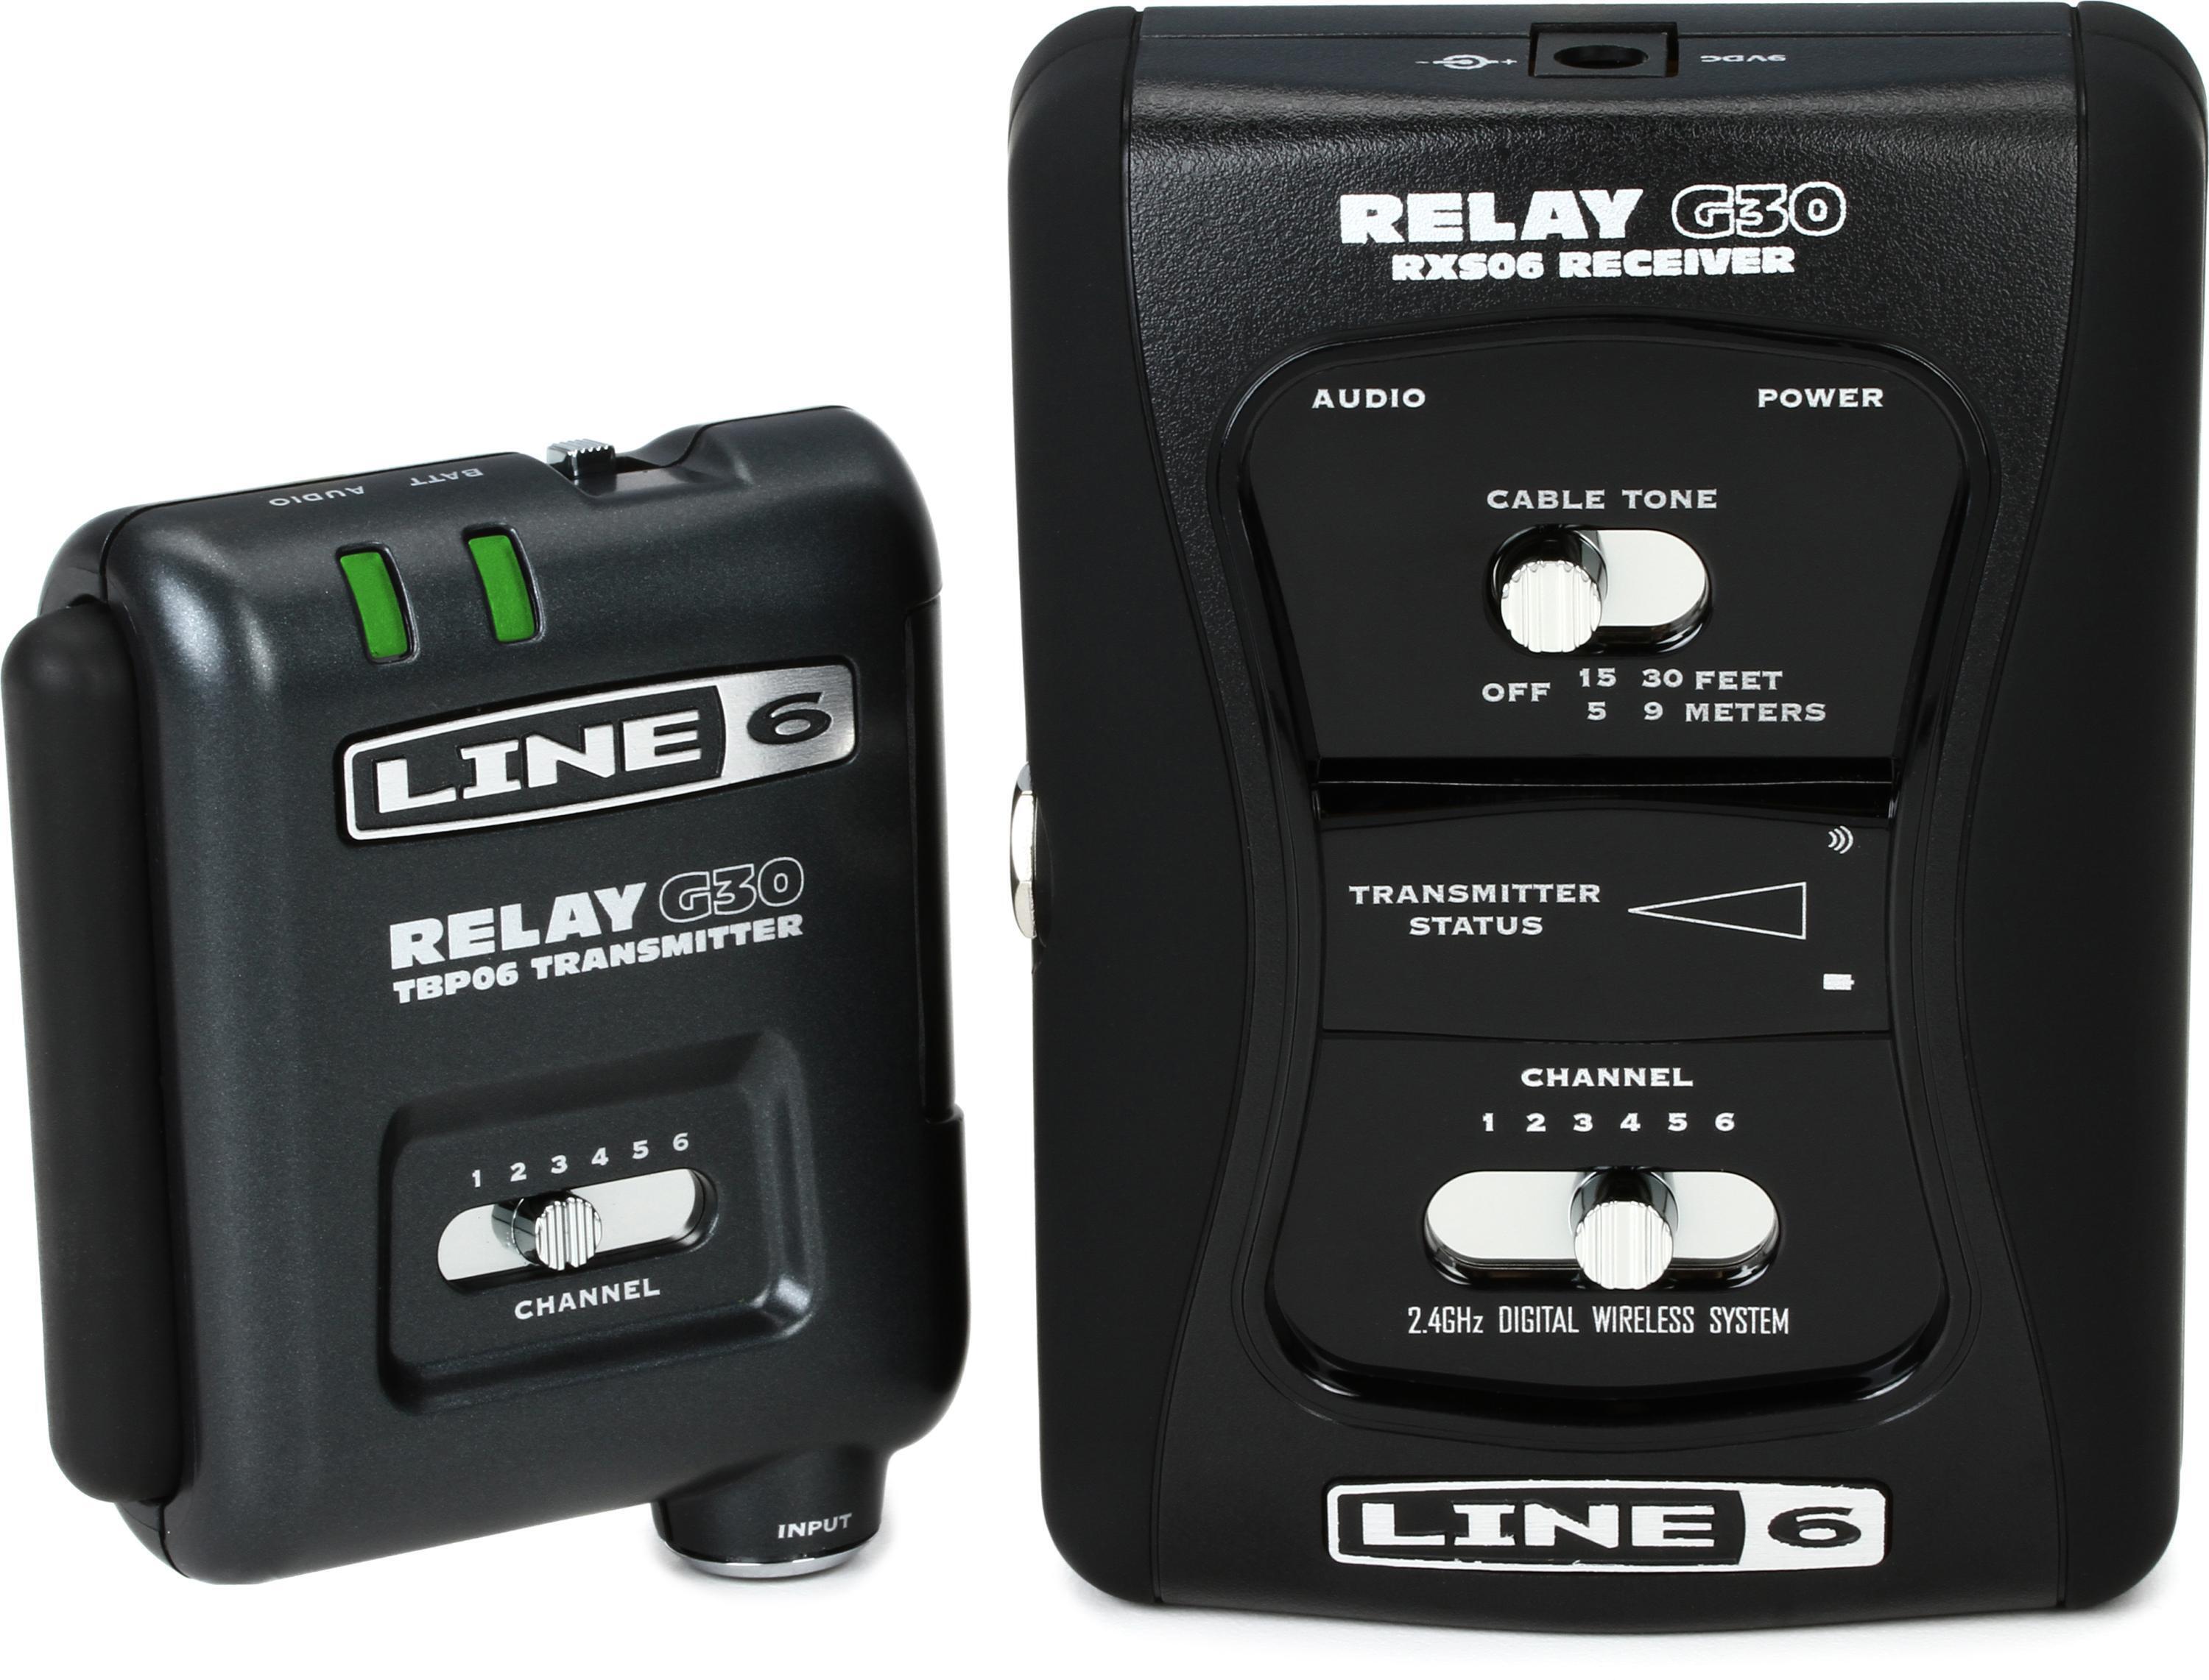 Line 6 Relay G30 Digital Wireless Guitar System | Sweetwater